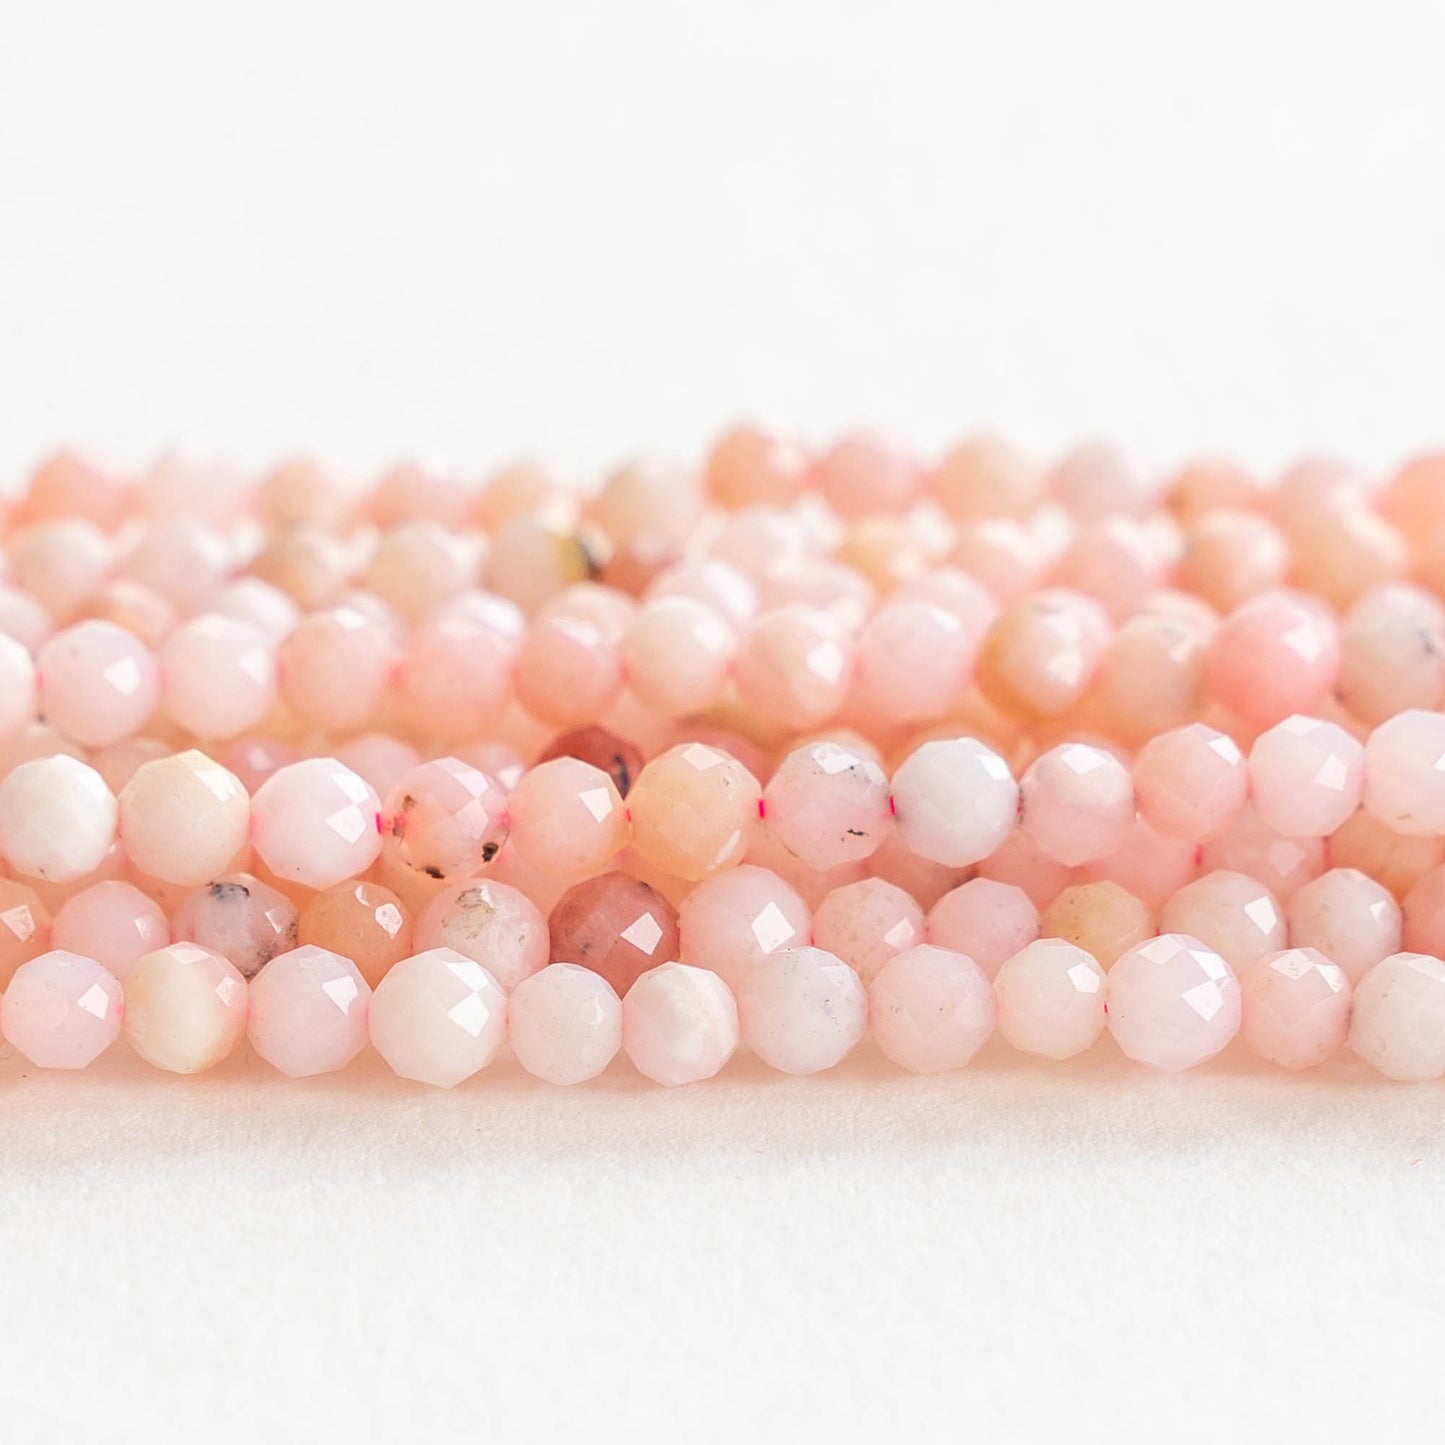 3.5mm Faceted Round Beads - Pink Opal - 16 Inches